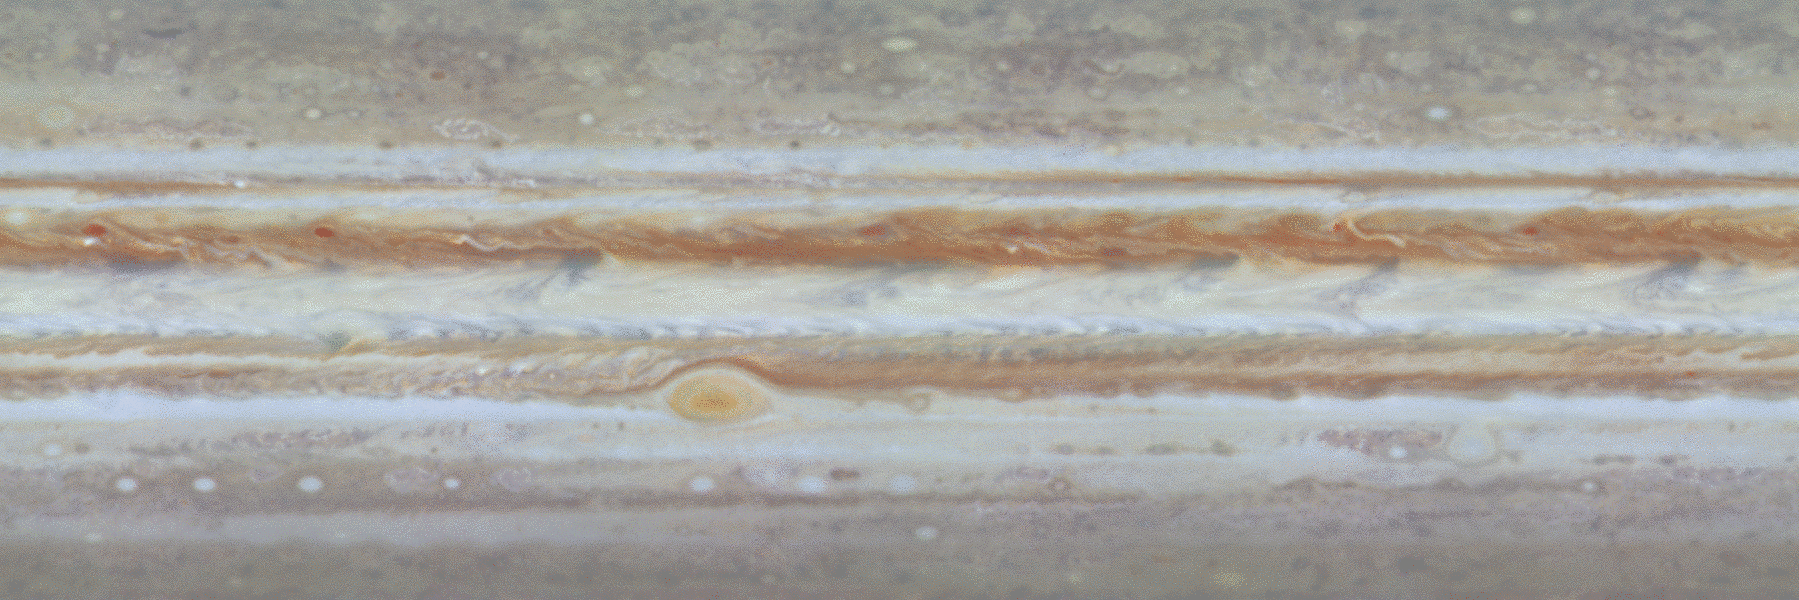 24 Jupiter days worth of cloud motion from Cassini